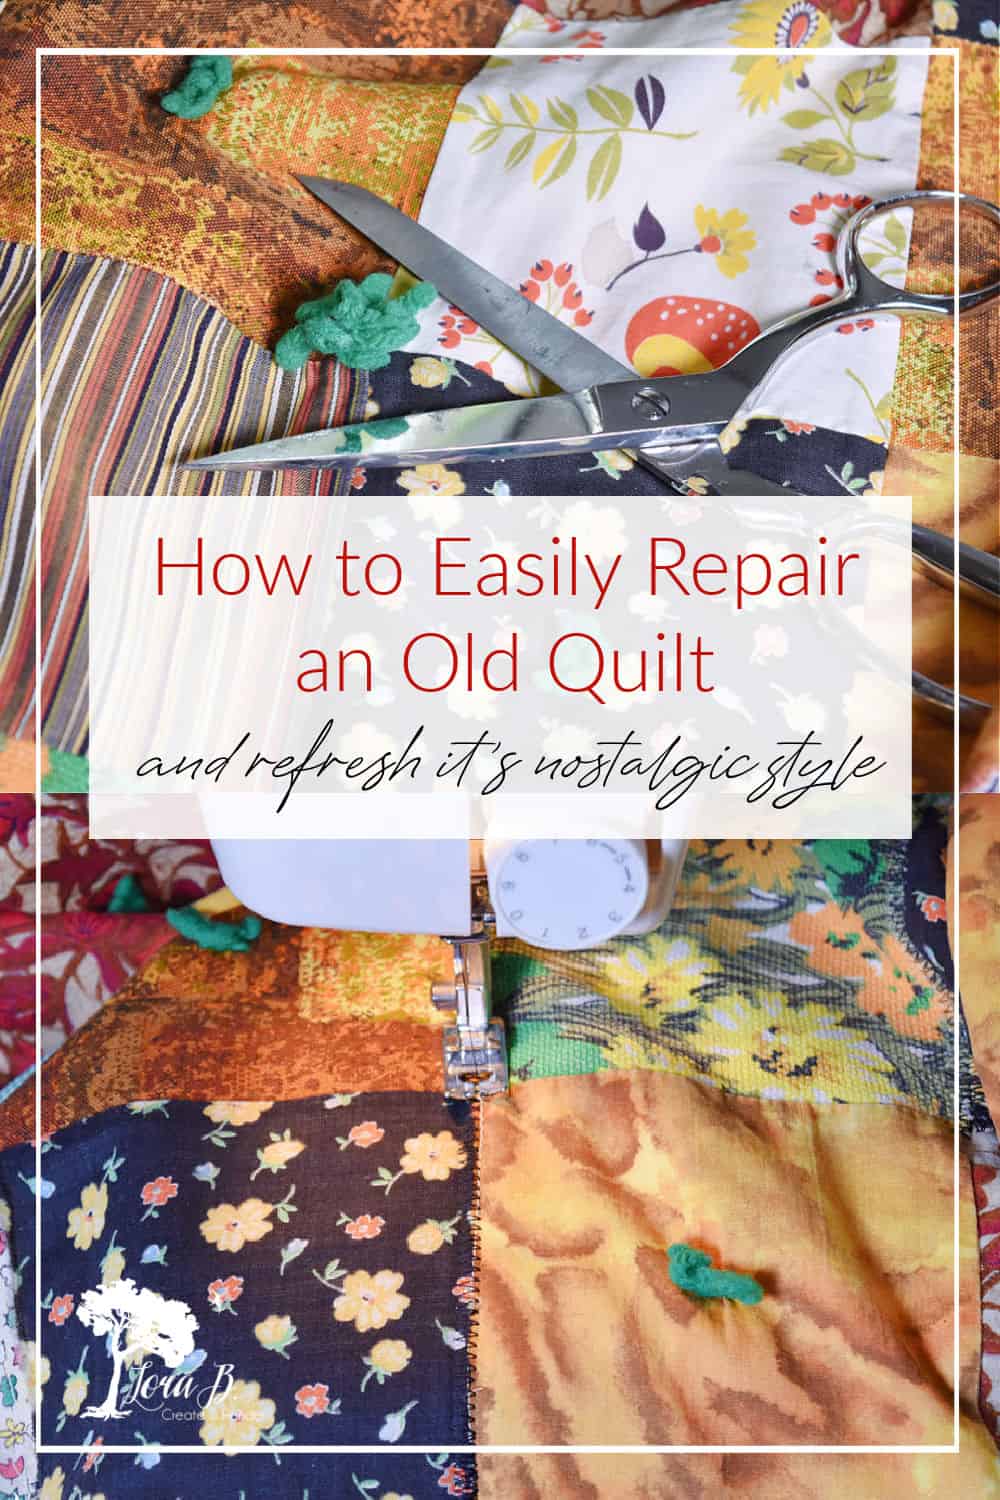 How to Easily Repair an Old Quilt